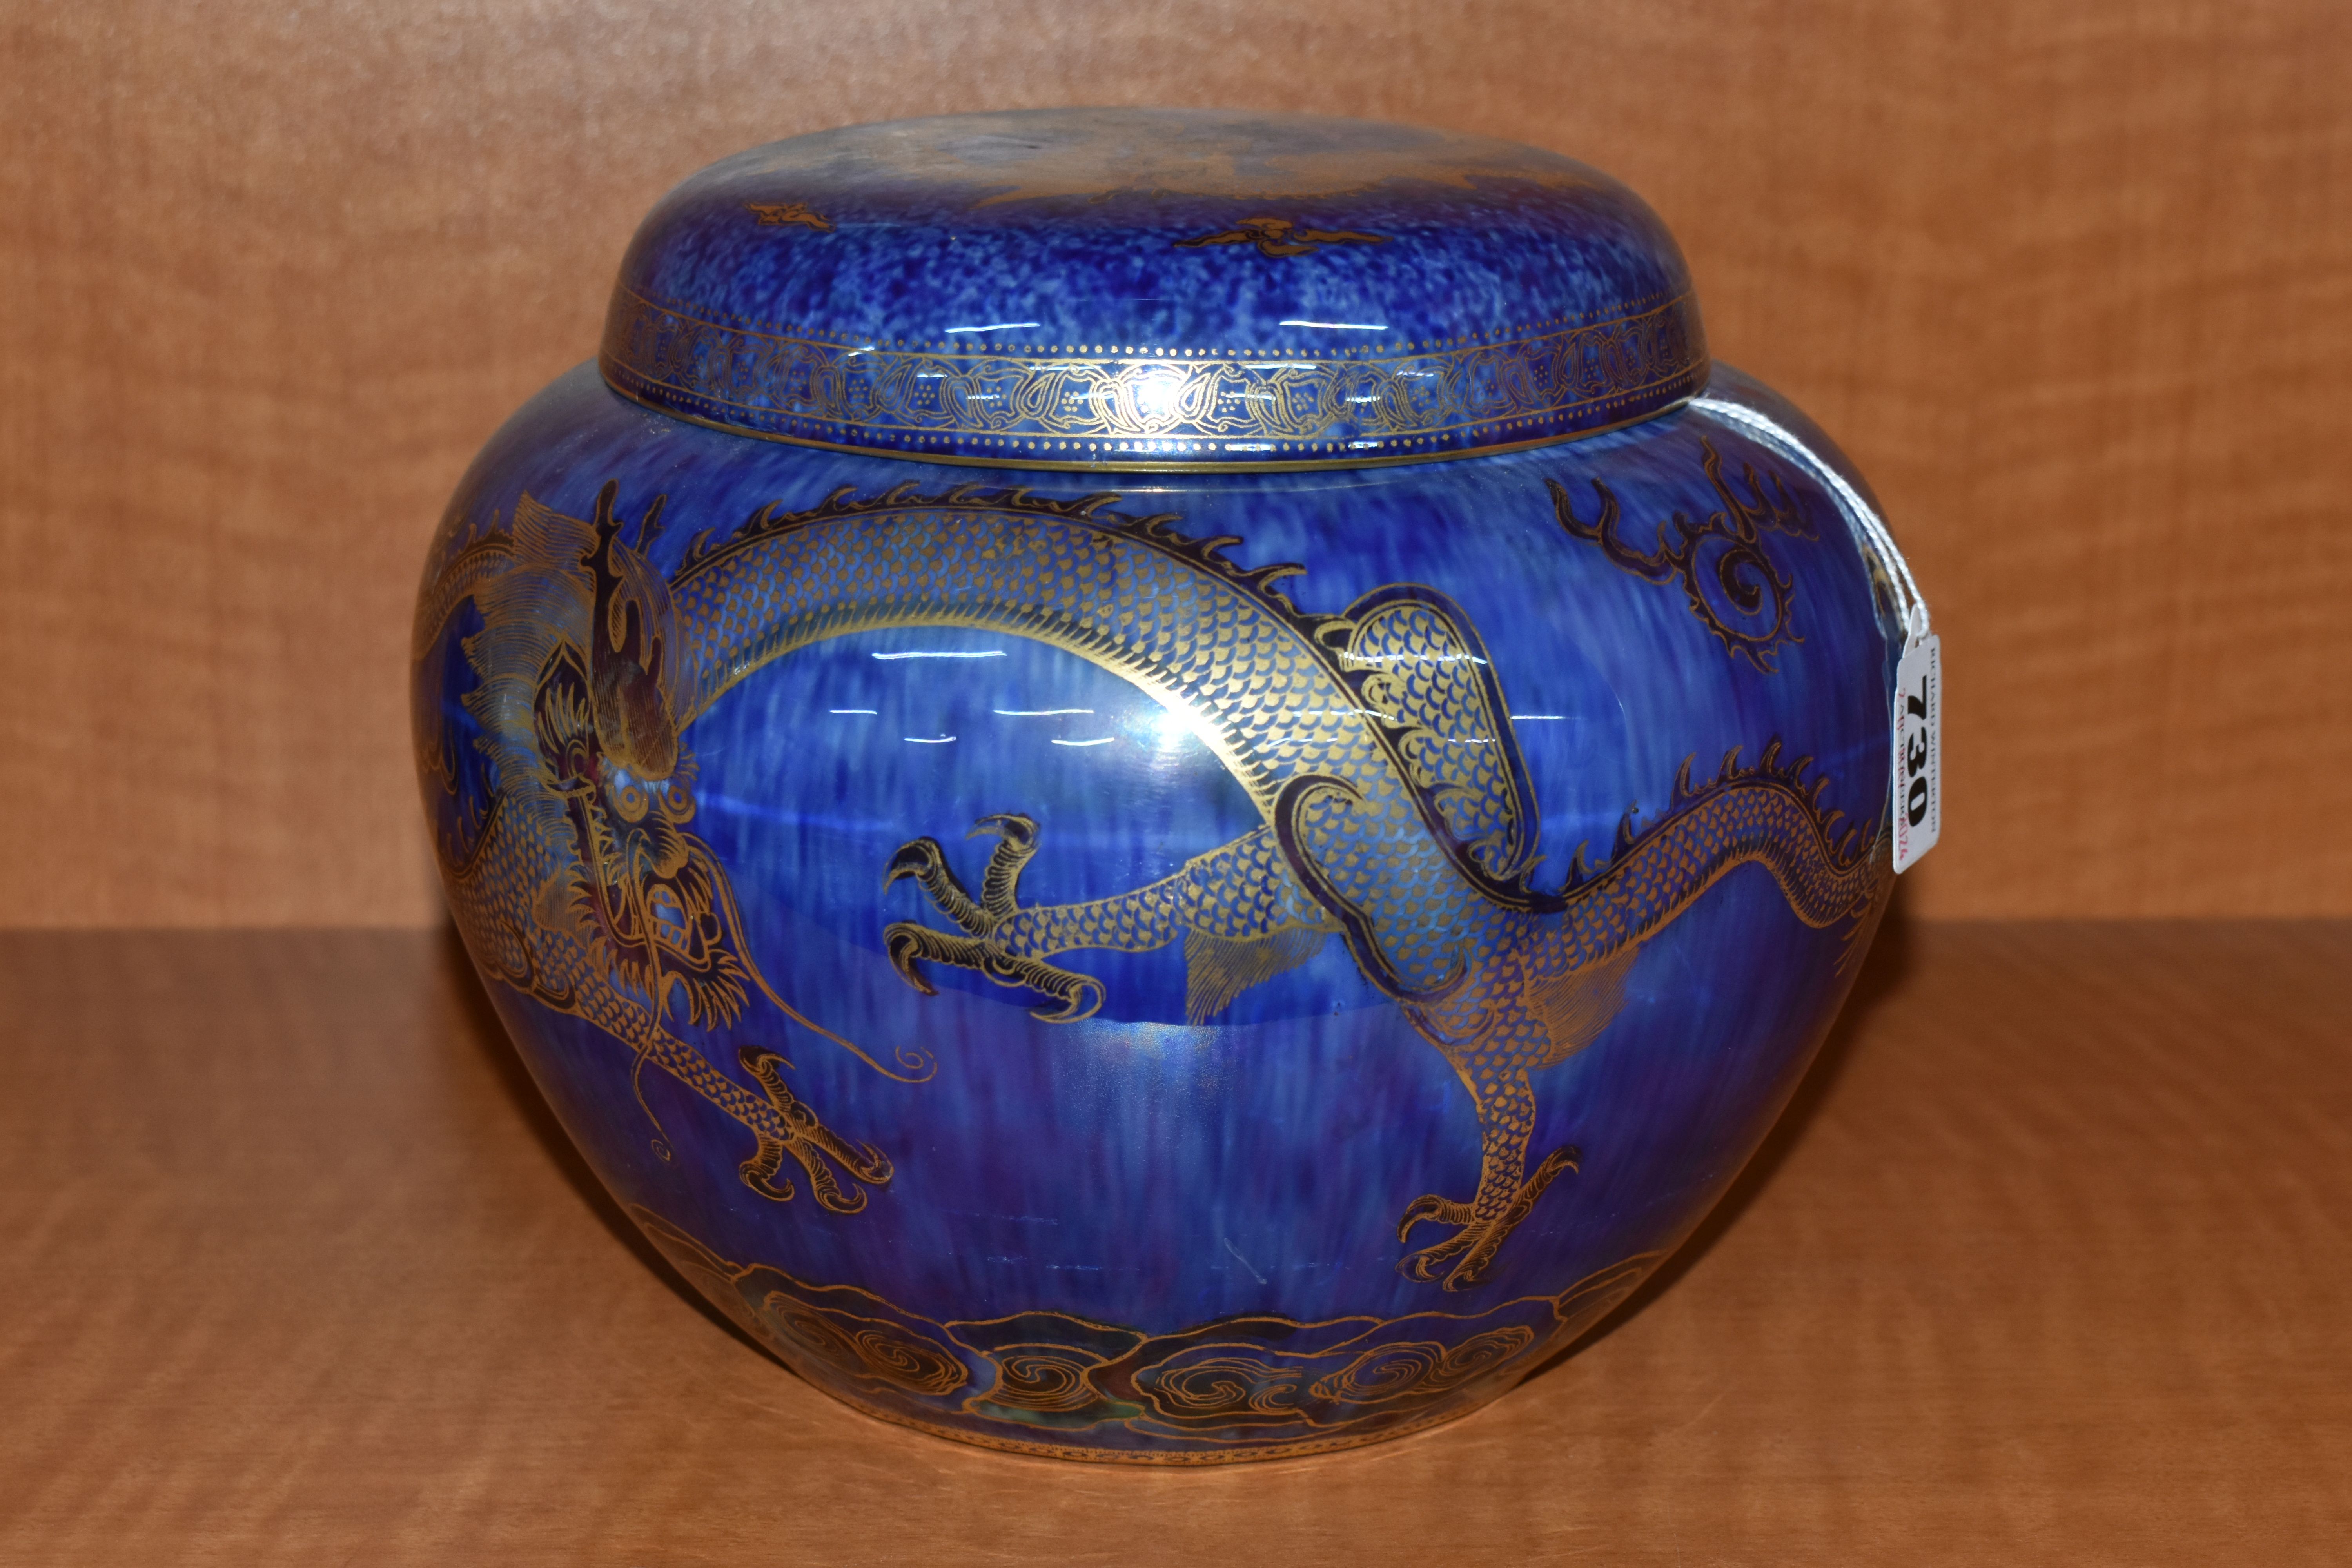 A WEDGWOOD DRAGON LUSTRE GINGER JAR AND COVER, pattern Z4829, the exterior with mottled blue